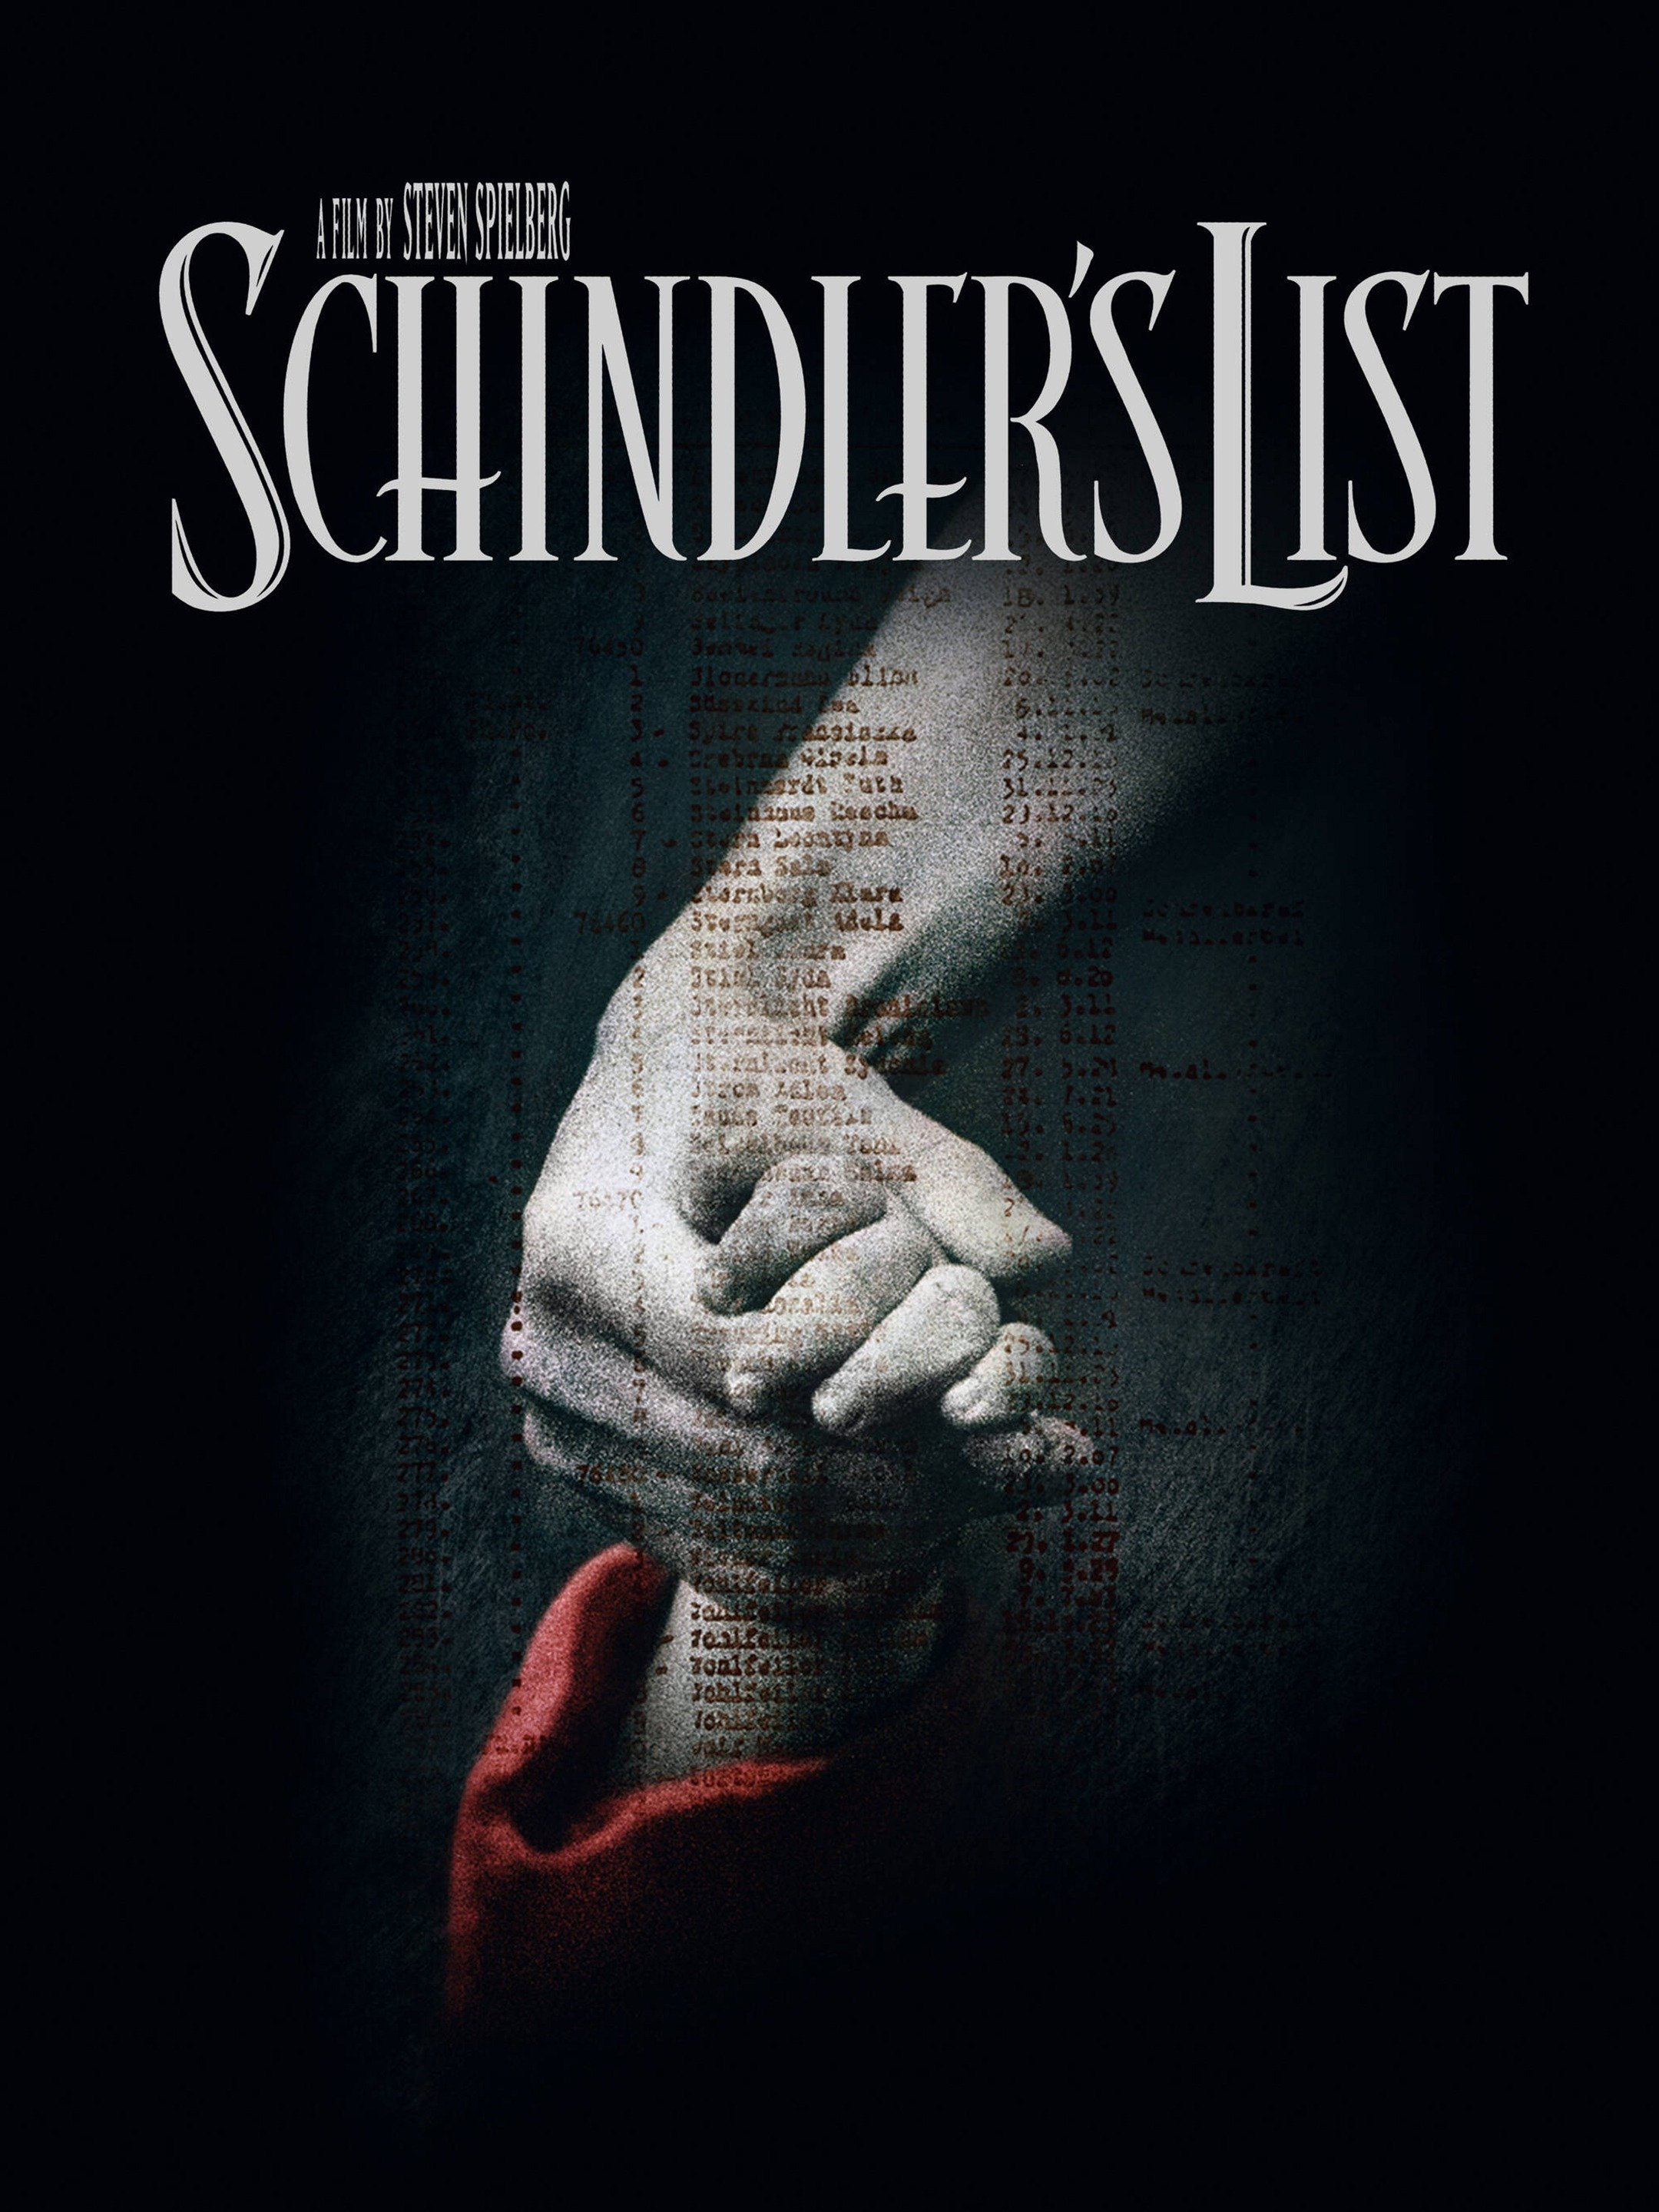 movie review of schindler's list